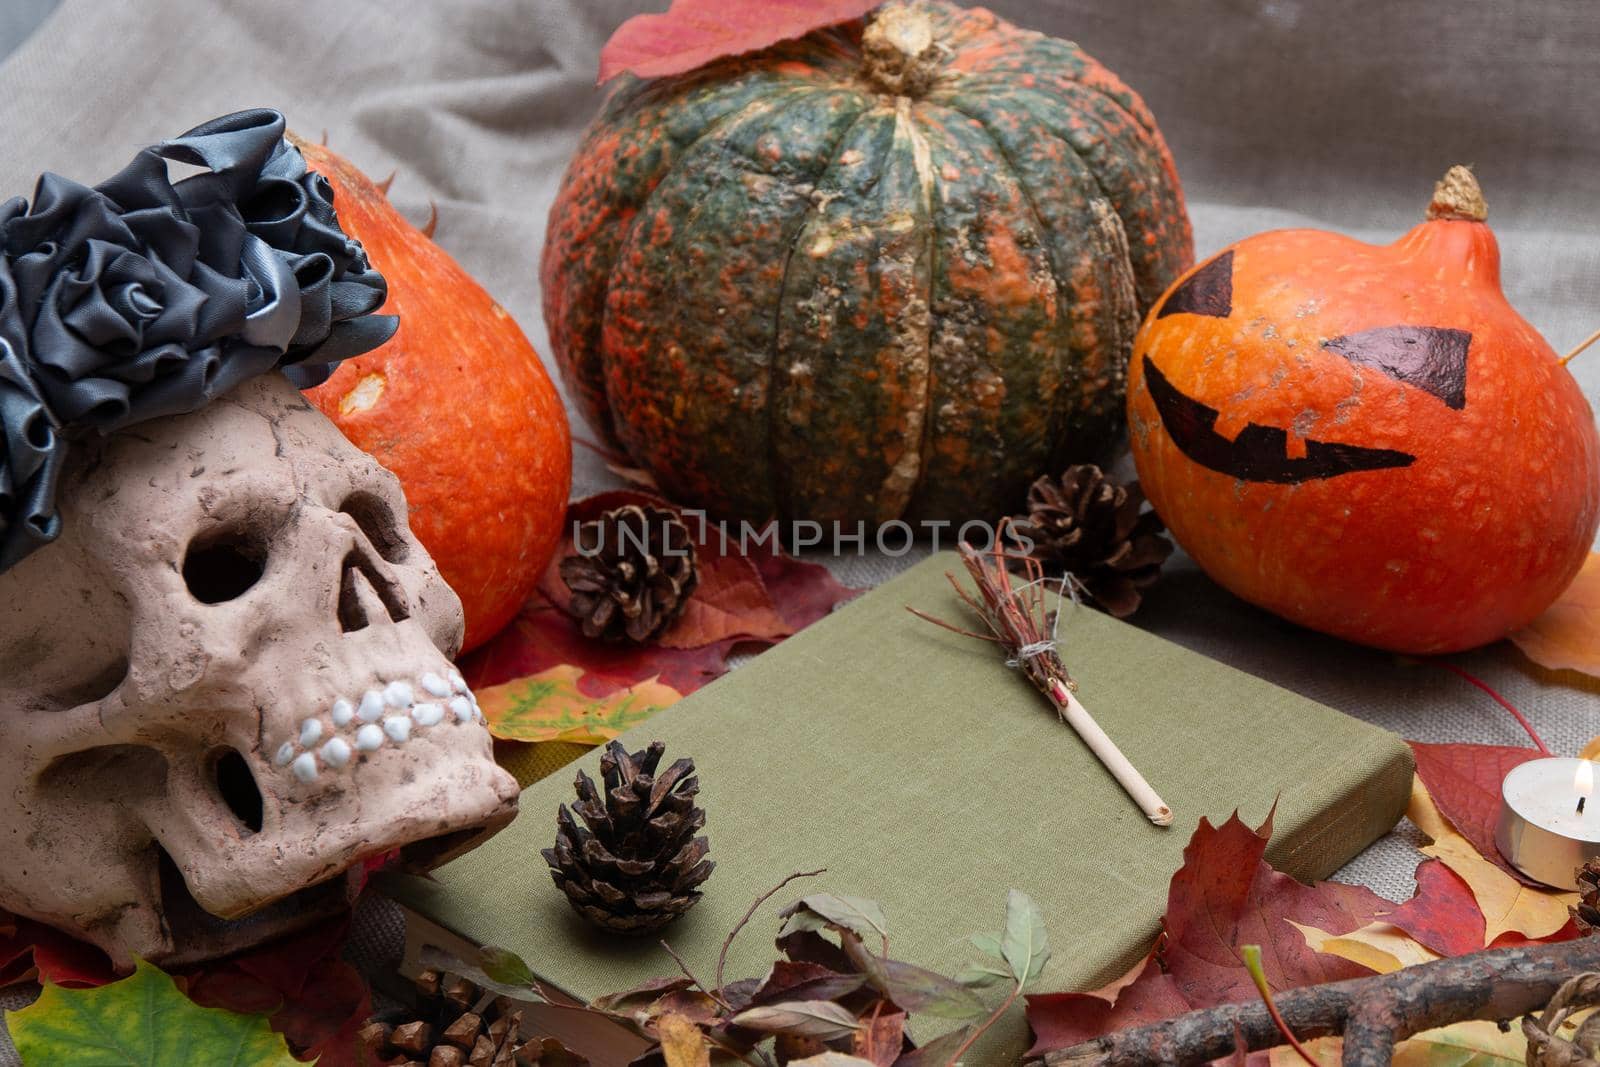 ceramic skull in a wreath of flowers from black ribbons, cones, autumn leaves, a candle and pumpkins, a jack head, a witch book, blurred background, halloween background